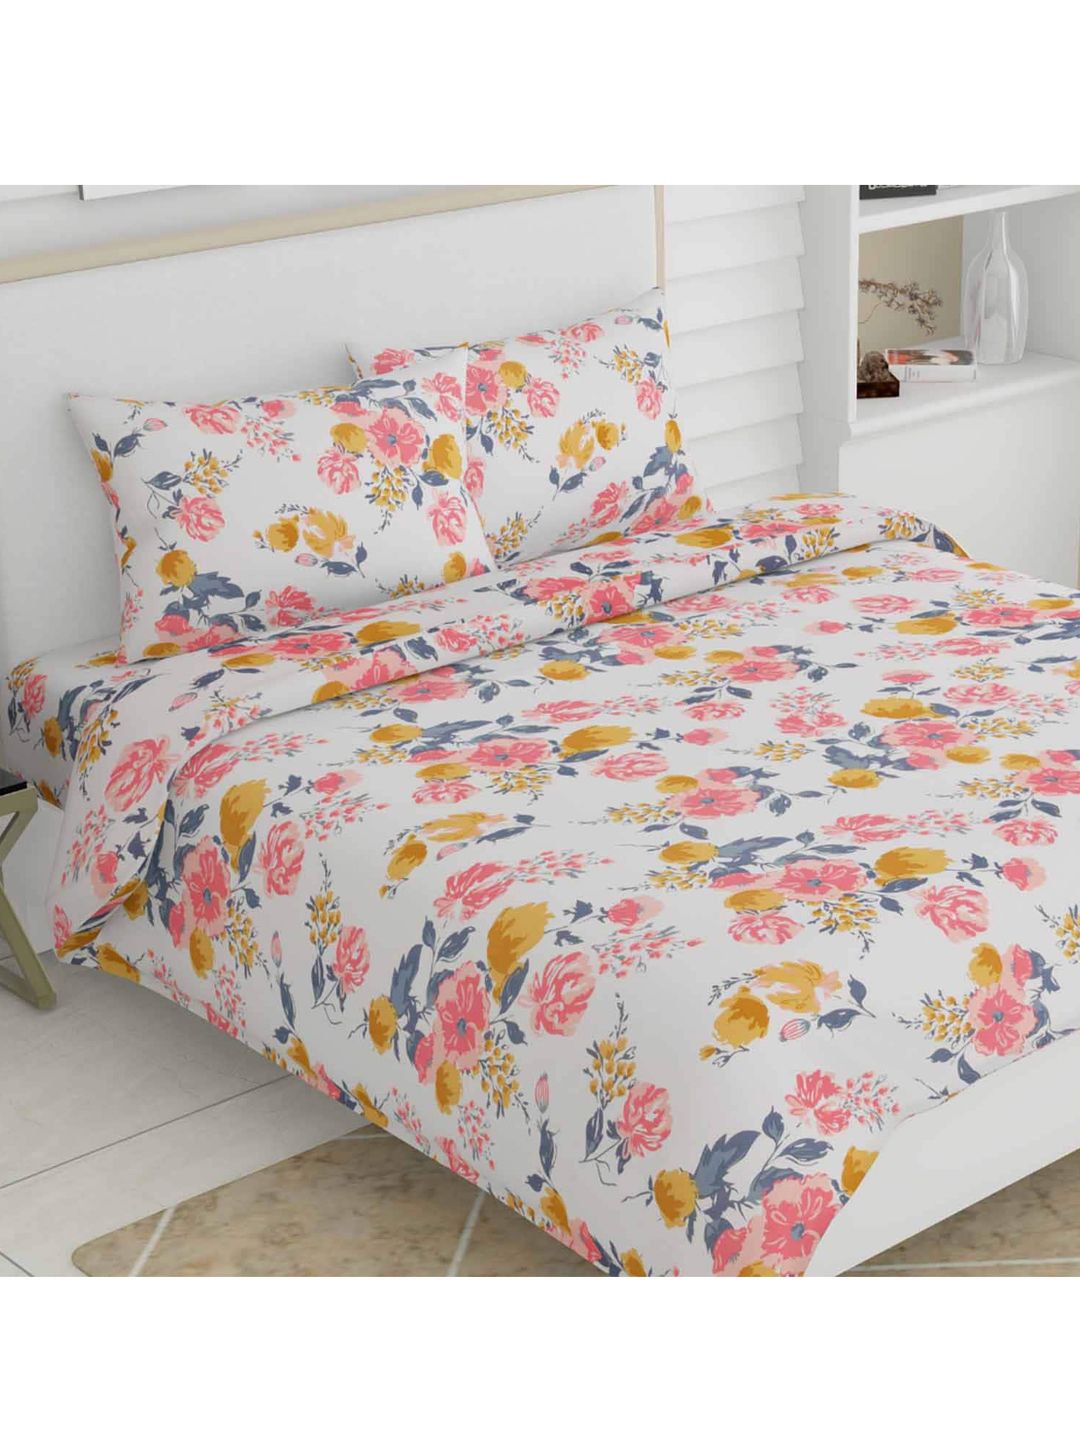 haus & kinder Unisex Multi Bedsheets Price in India